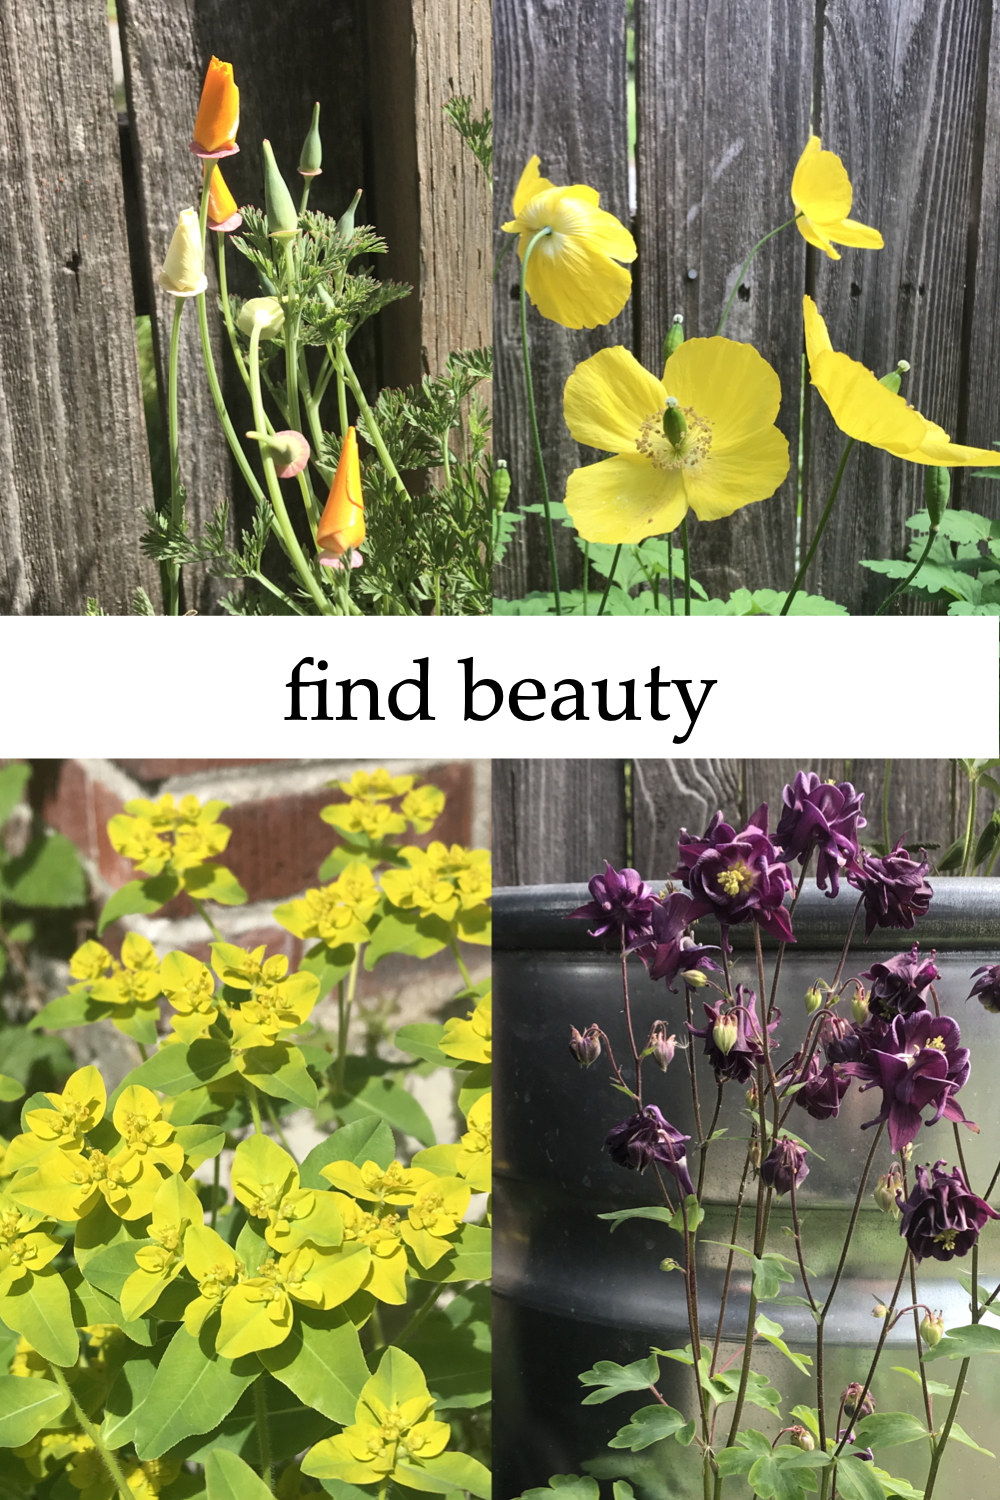 4 photos compiled together: orange and cream California poppies against a cedar fence; lemon yellow Welsh poppies against a cedar fence; lime green euphorbia against a brick chimney; dark purple columbine against a steel planter. Text on image reads: "find beauty".